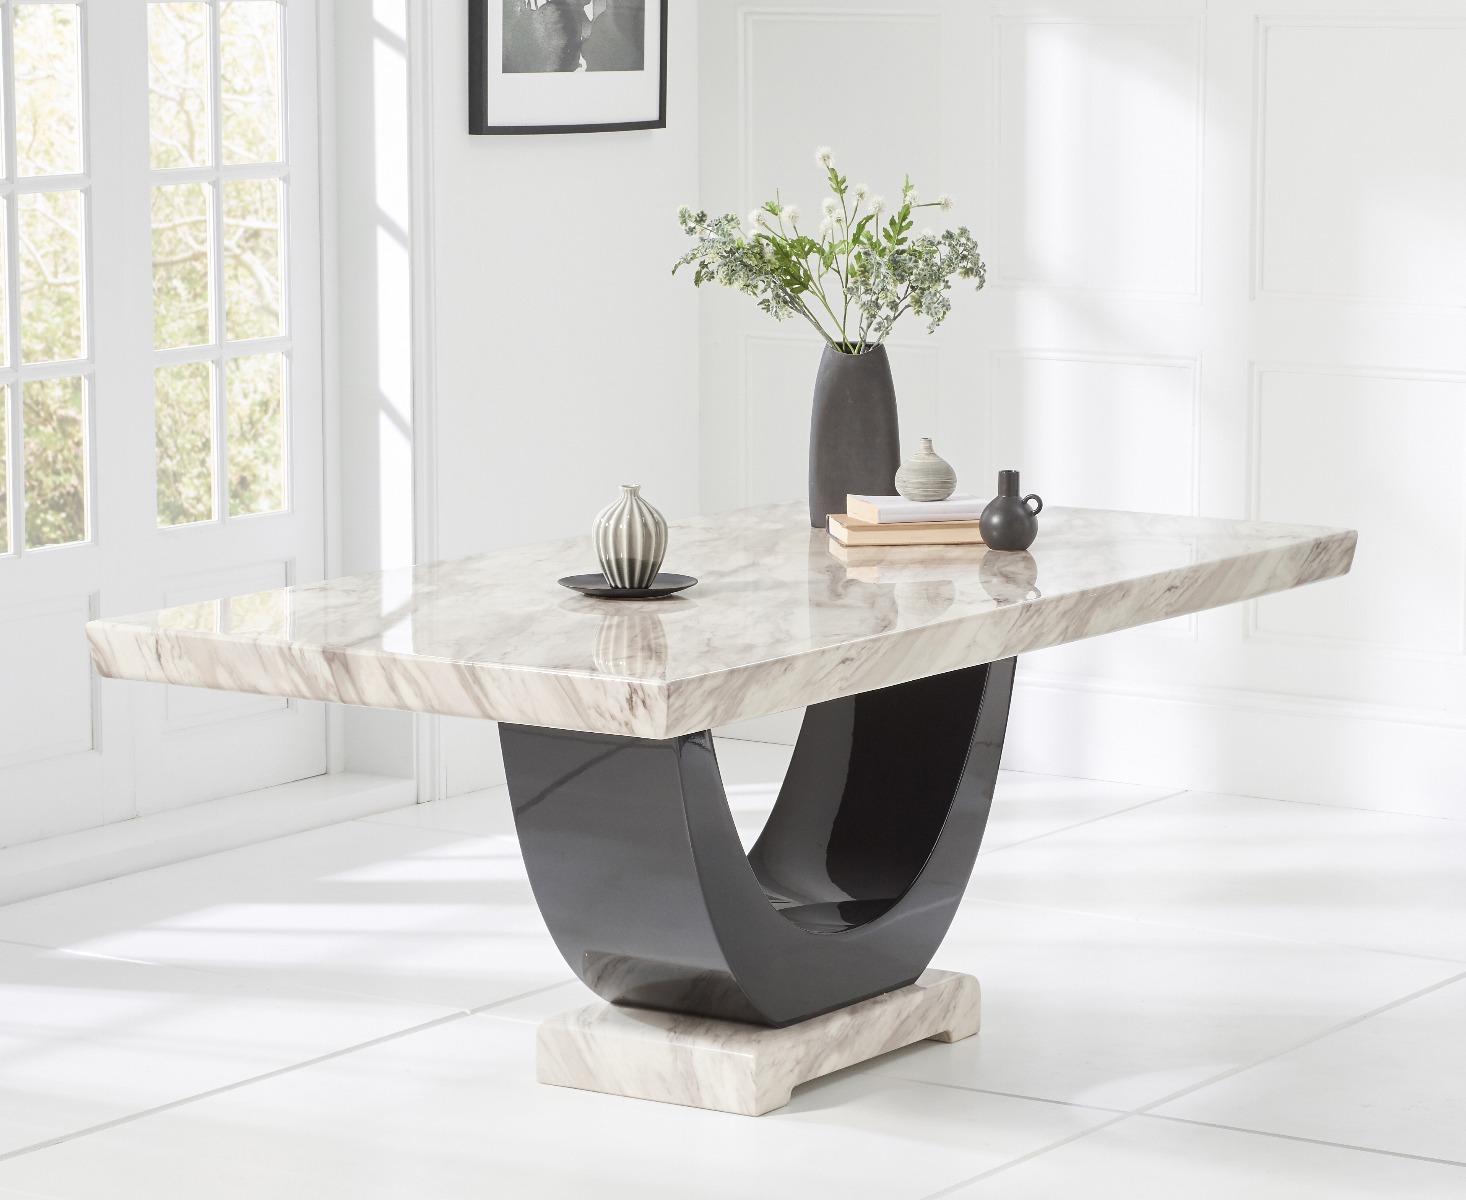 Photo 1 of Novara 200cm cream and black pedestal marble dining table with 8 brown novara chairs